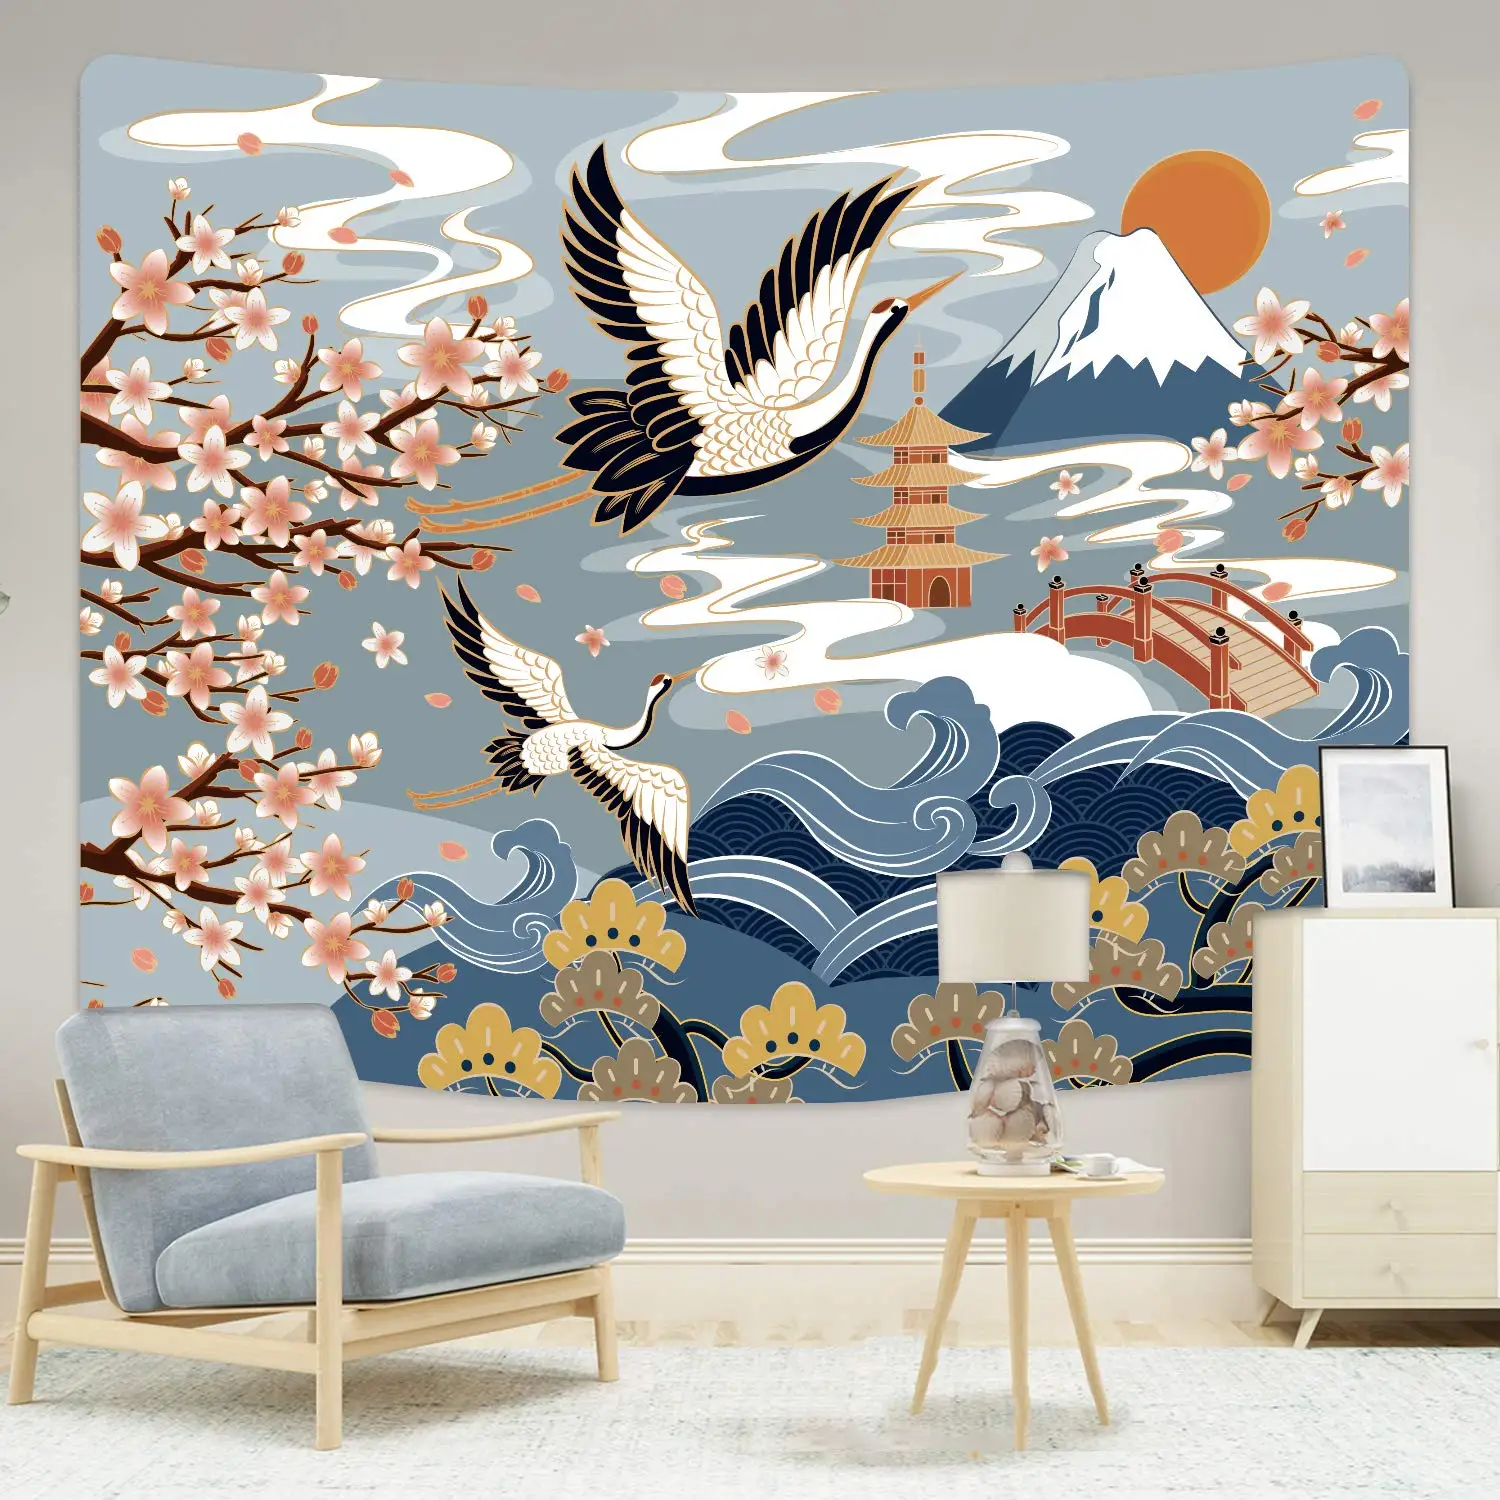 

Japanese Crane Tapestry Ocean Wave Sunset Wall Hanging Cherry Blossoms Tapestries Bedroom Living Room Home Dorm Wall Decor Cloth